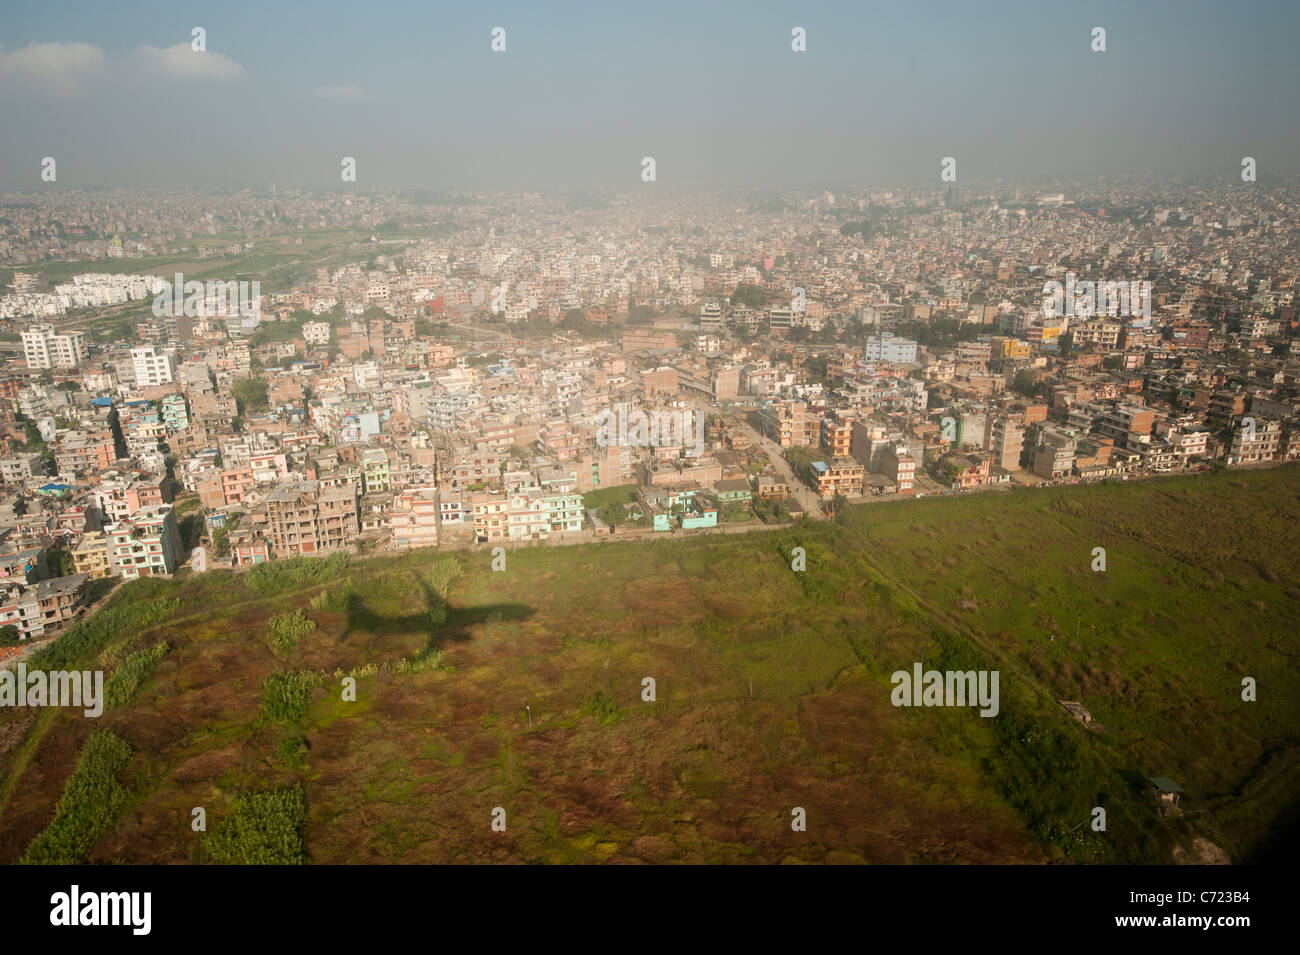 An airplane approaches the runway; providing a view of Kathmandu's inner city infrastructure. Stock Photo